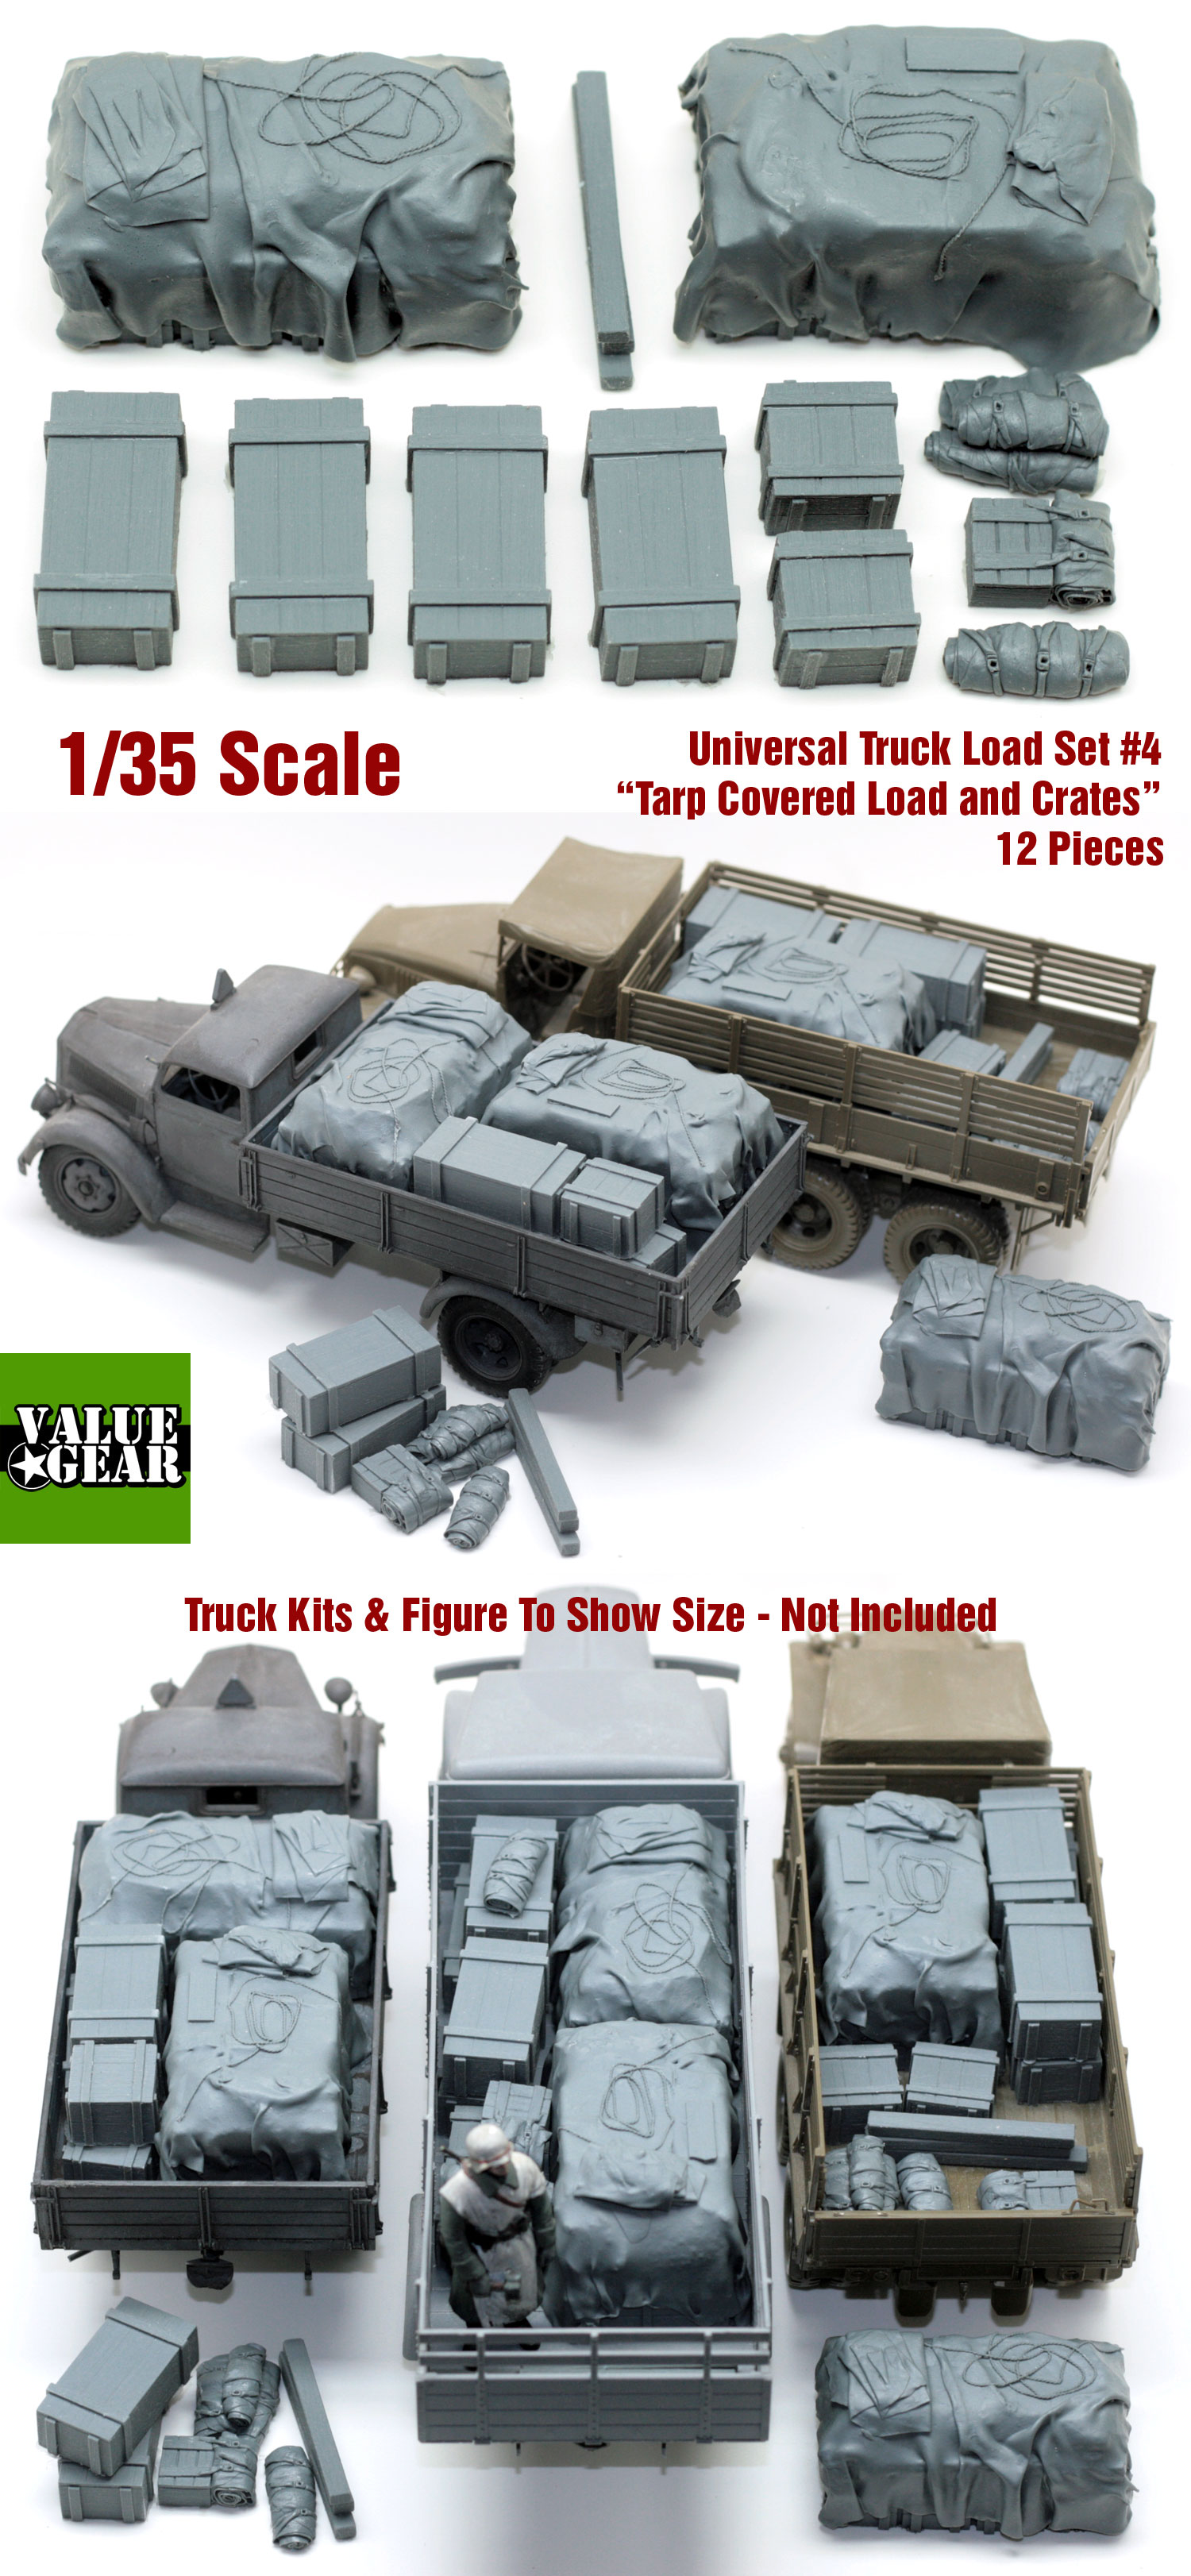 Value Gear 1/35 Universal/Generic Truck Load Set #5 TarpCovered Crates 